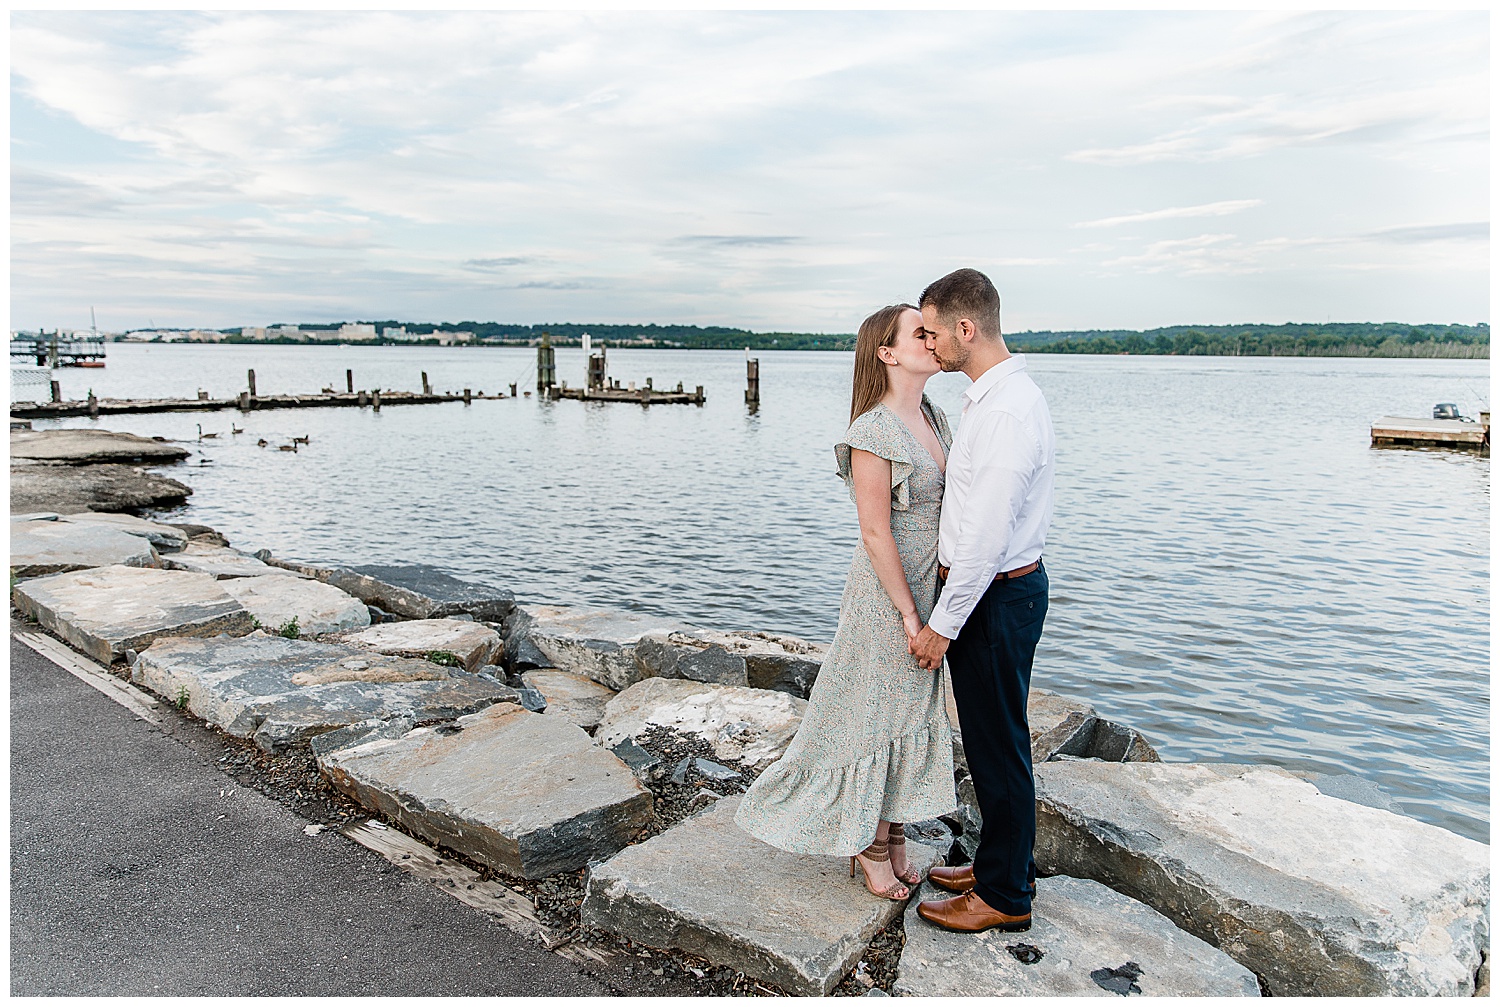 Kisses. By the water. Alexandria. Virginia.